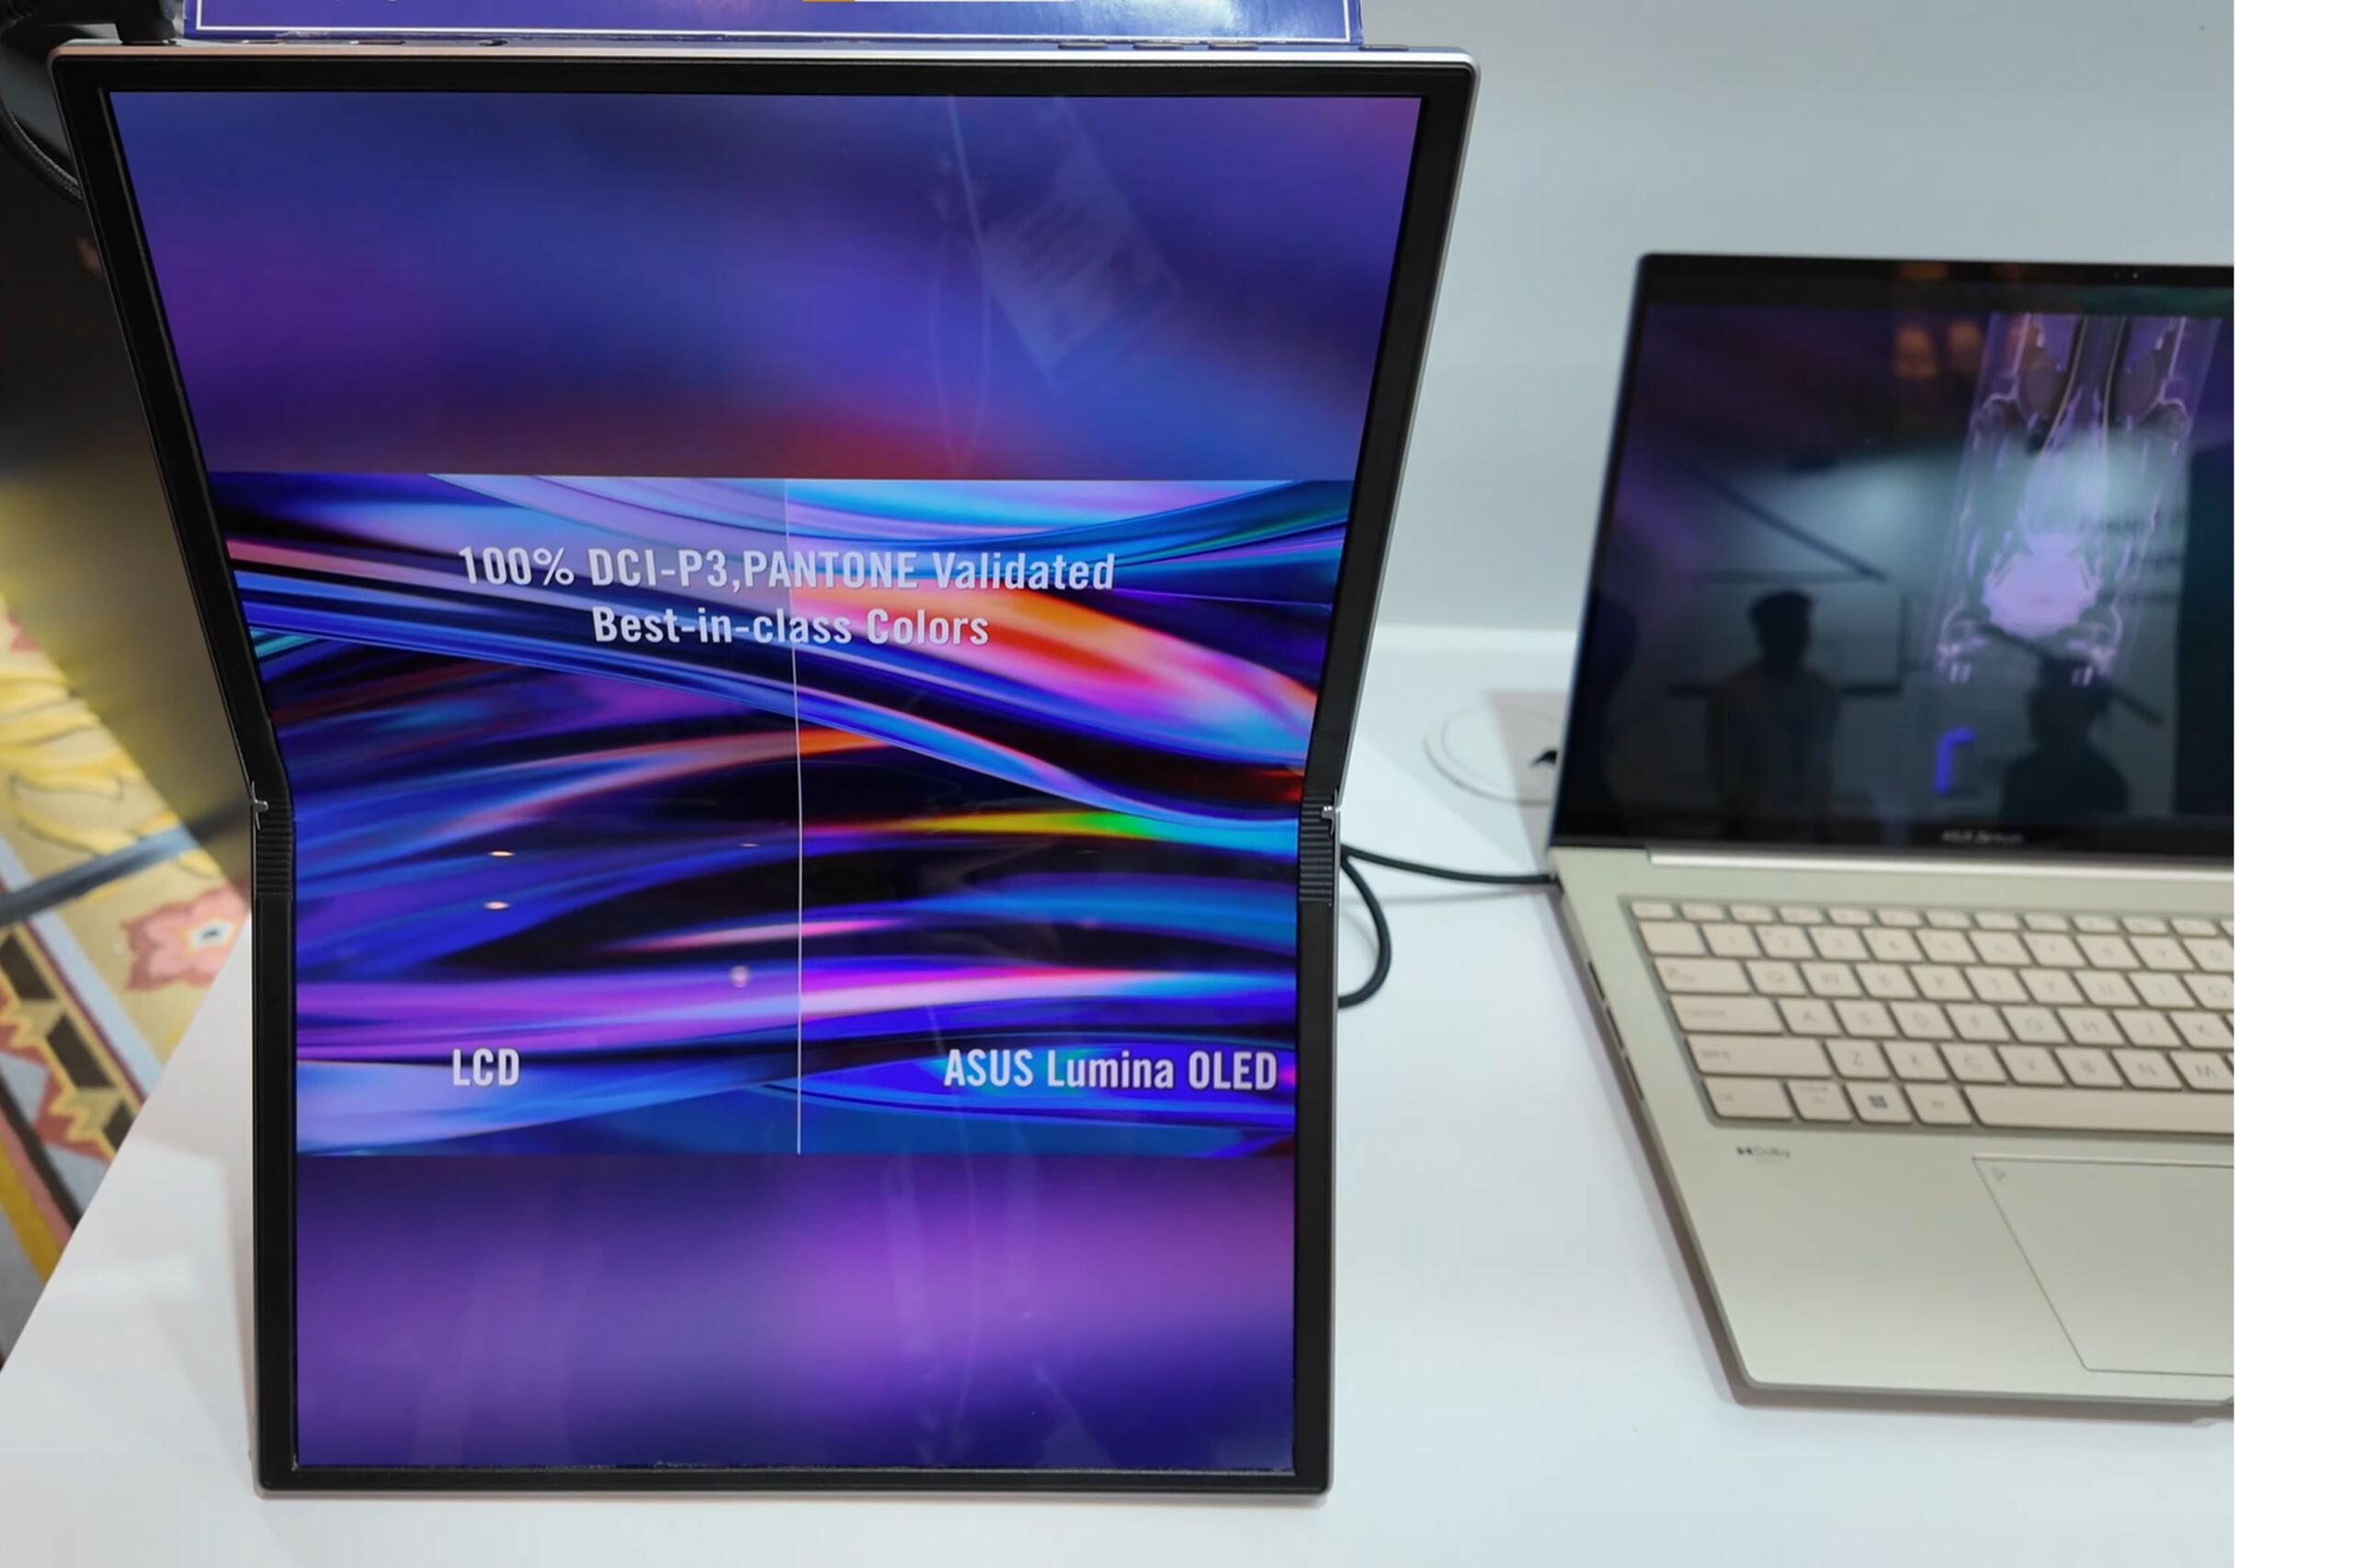 Asus will release a 17-inch foldable OLED laptop this year - The Verge